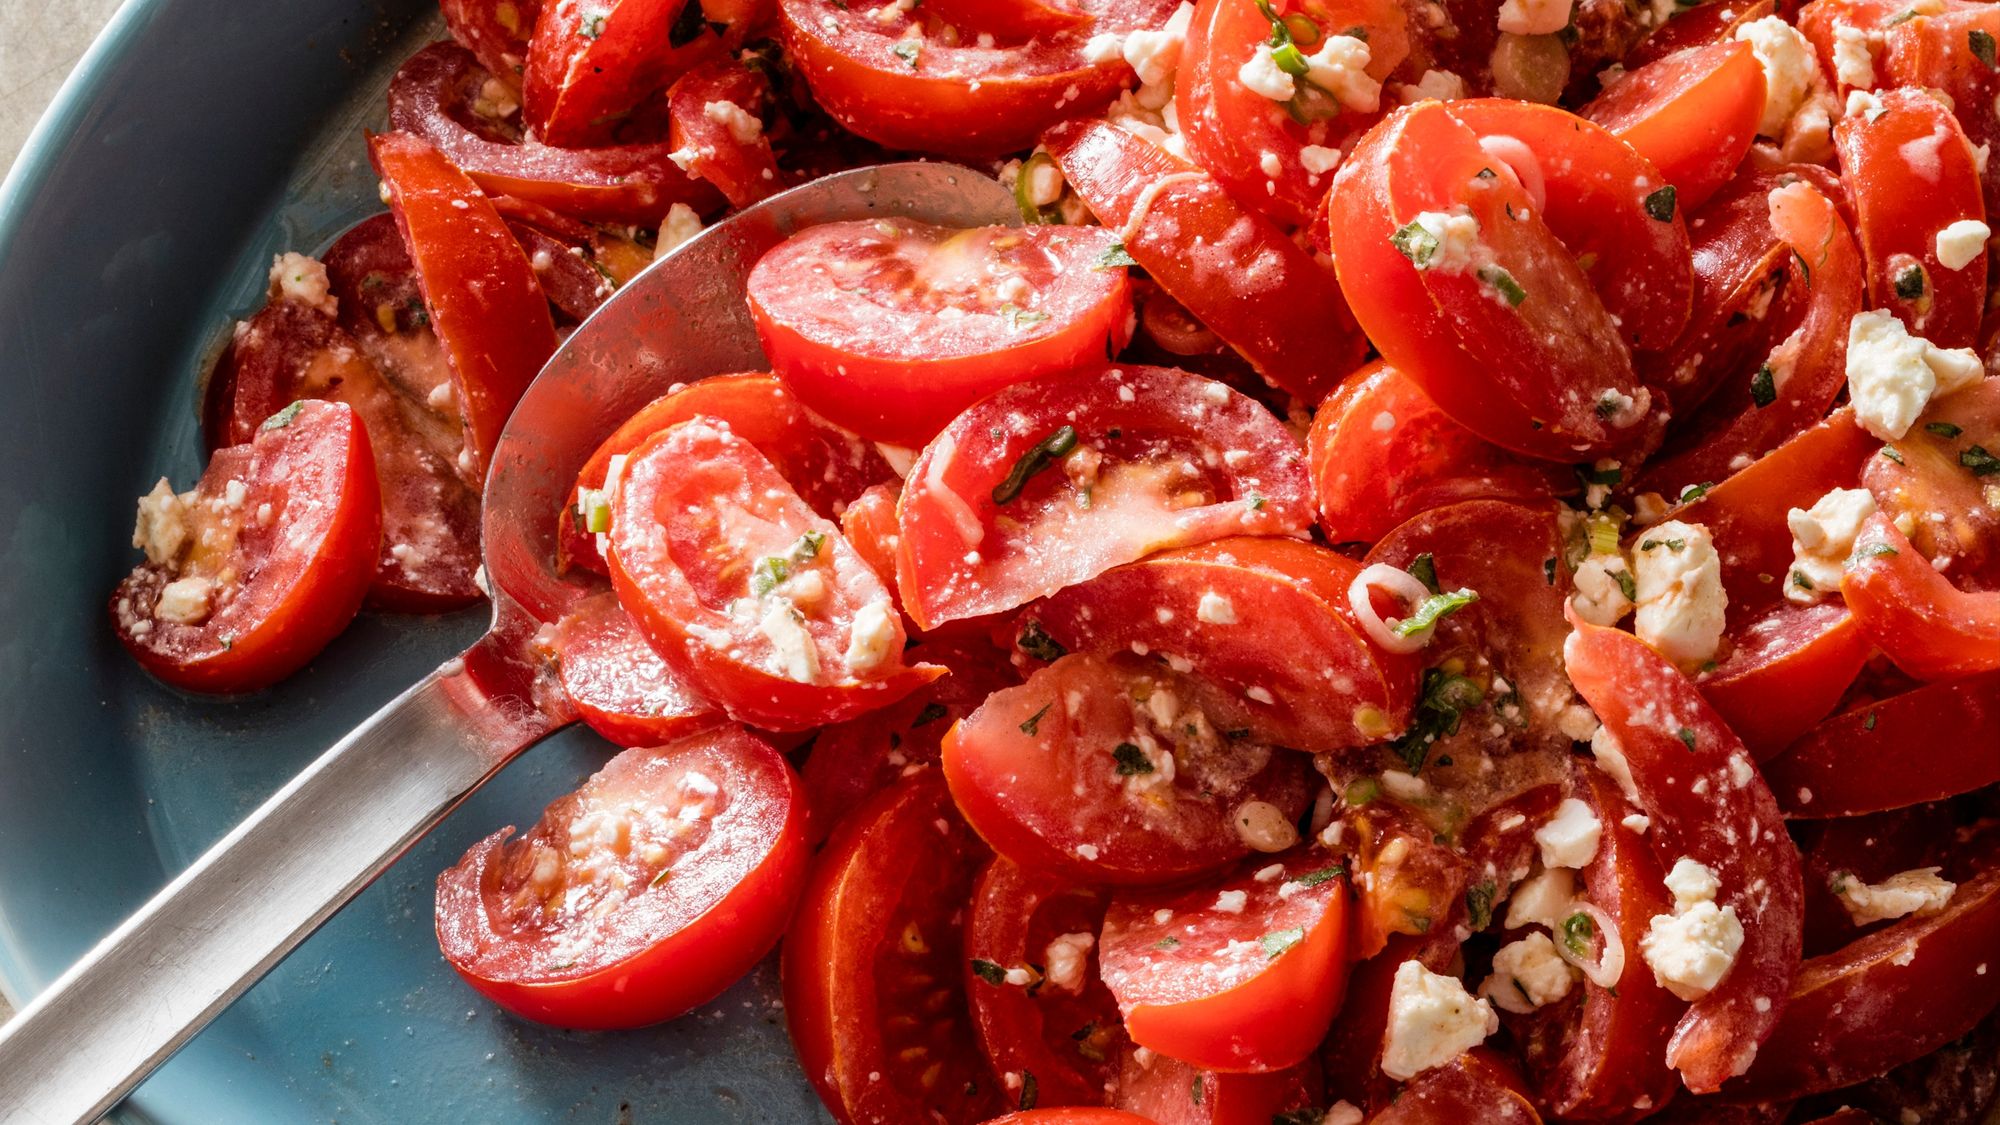 Make this most of ripe, juicy tomatoes in this delicious dish